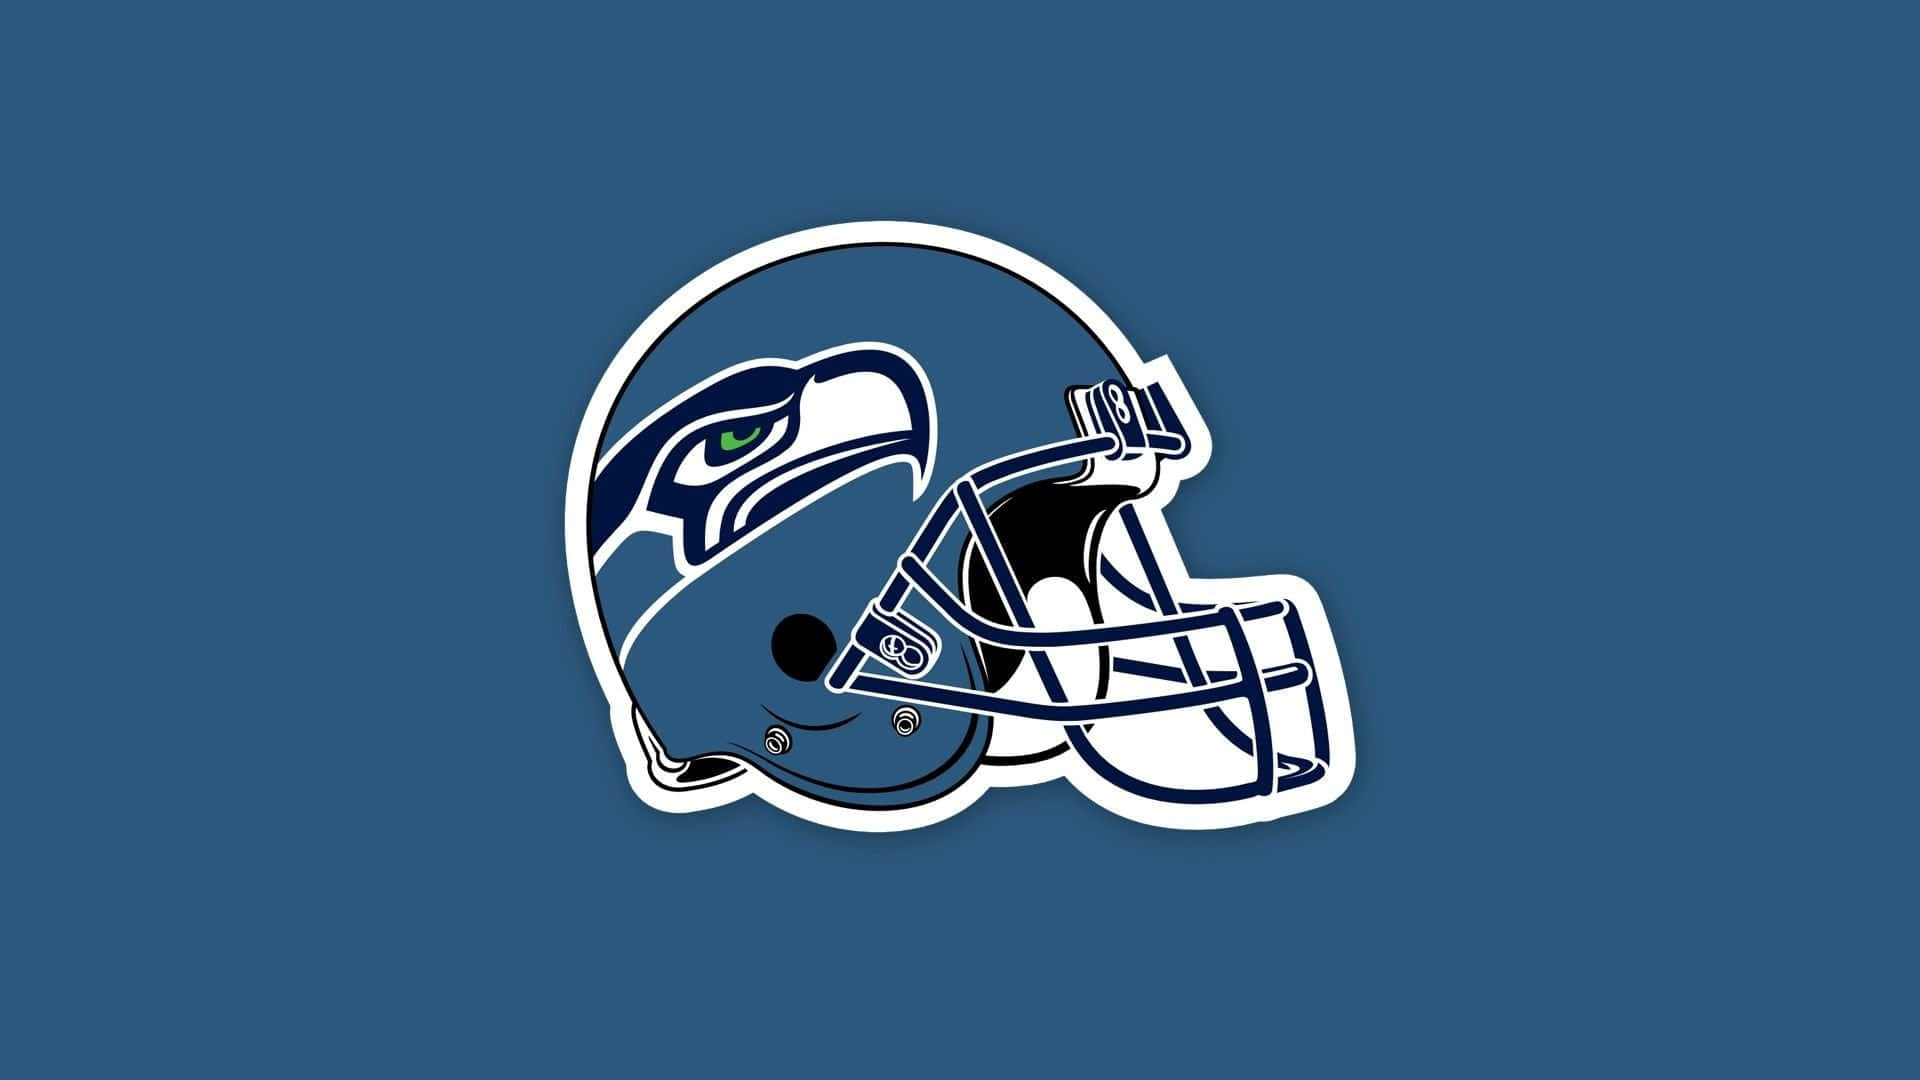 Caption: Seattle Seahawks Excitement - Showcase their bold and dynamic spirit with this captivating background.